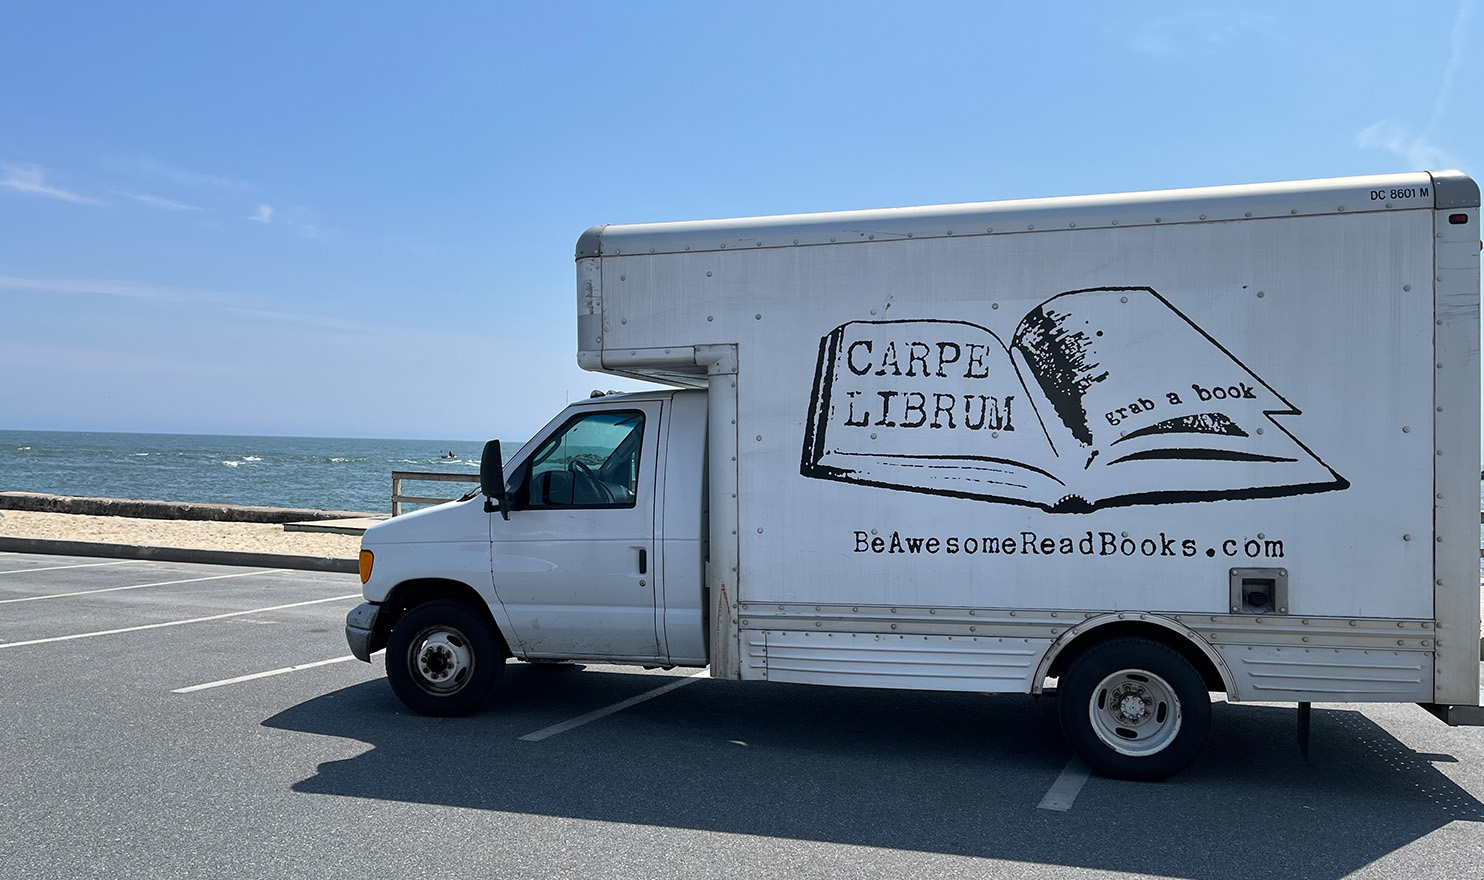 A white box truck with the Carpe Librum logo across the side is parked in a beach front parking lot. Elizabeth and her husband have invested in a truck to transport all their booth supplies to different states along the Eastern United States.